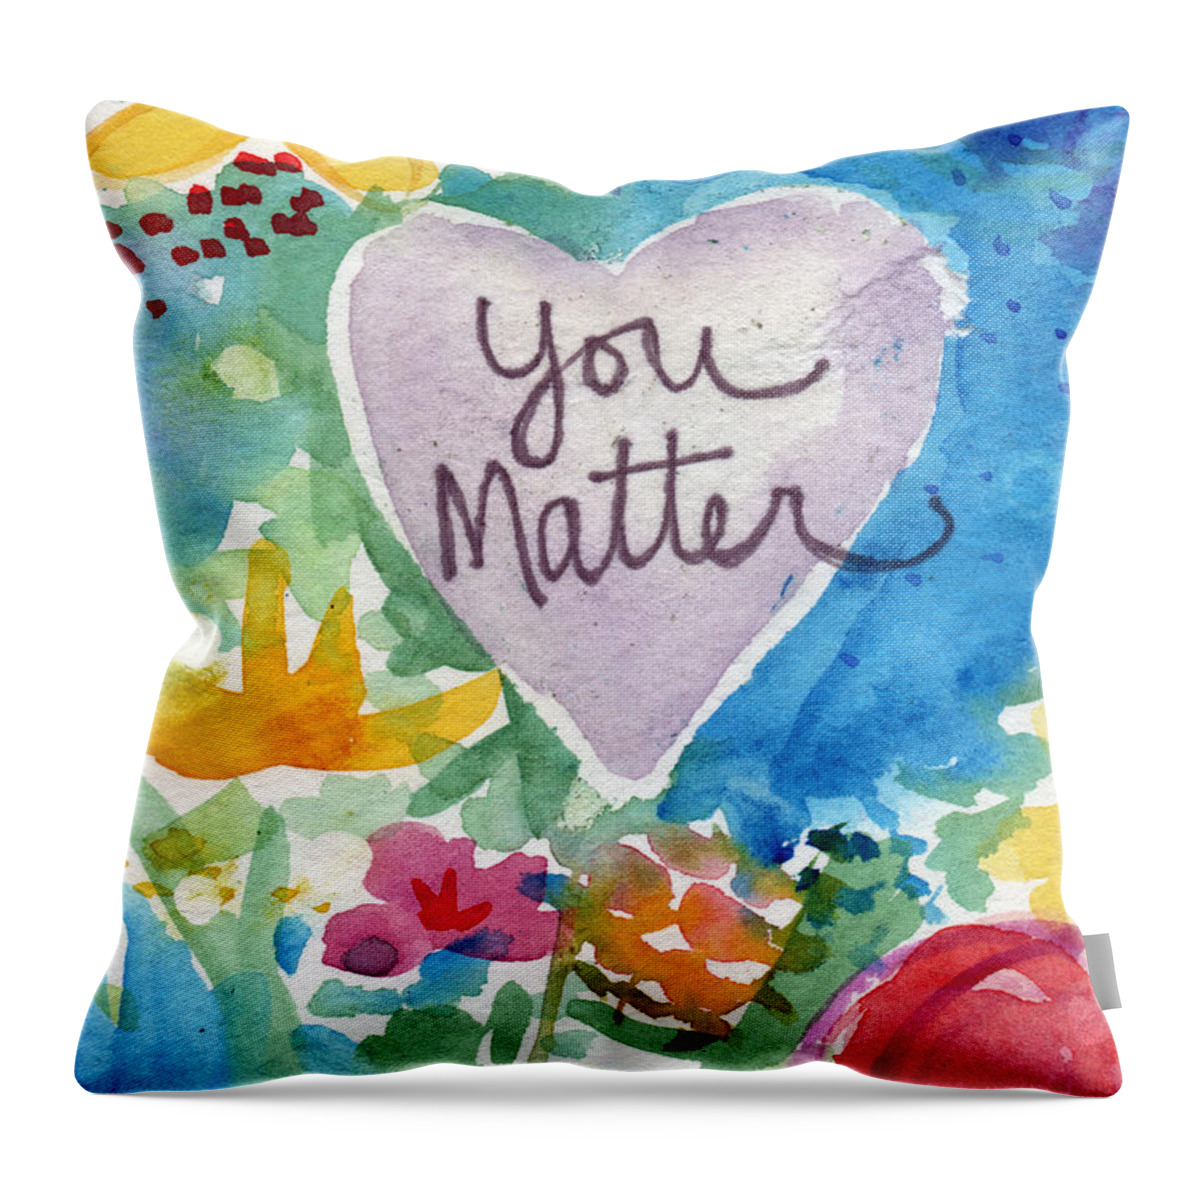 Heart Throw Pillow featuring the mixed media You Matter Heart and Flowers- Art by Linda Woods by Linda Woods